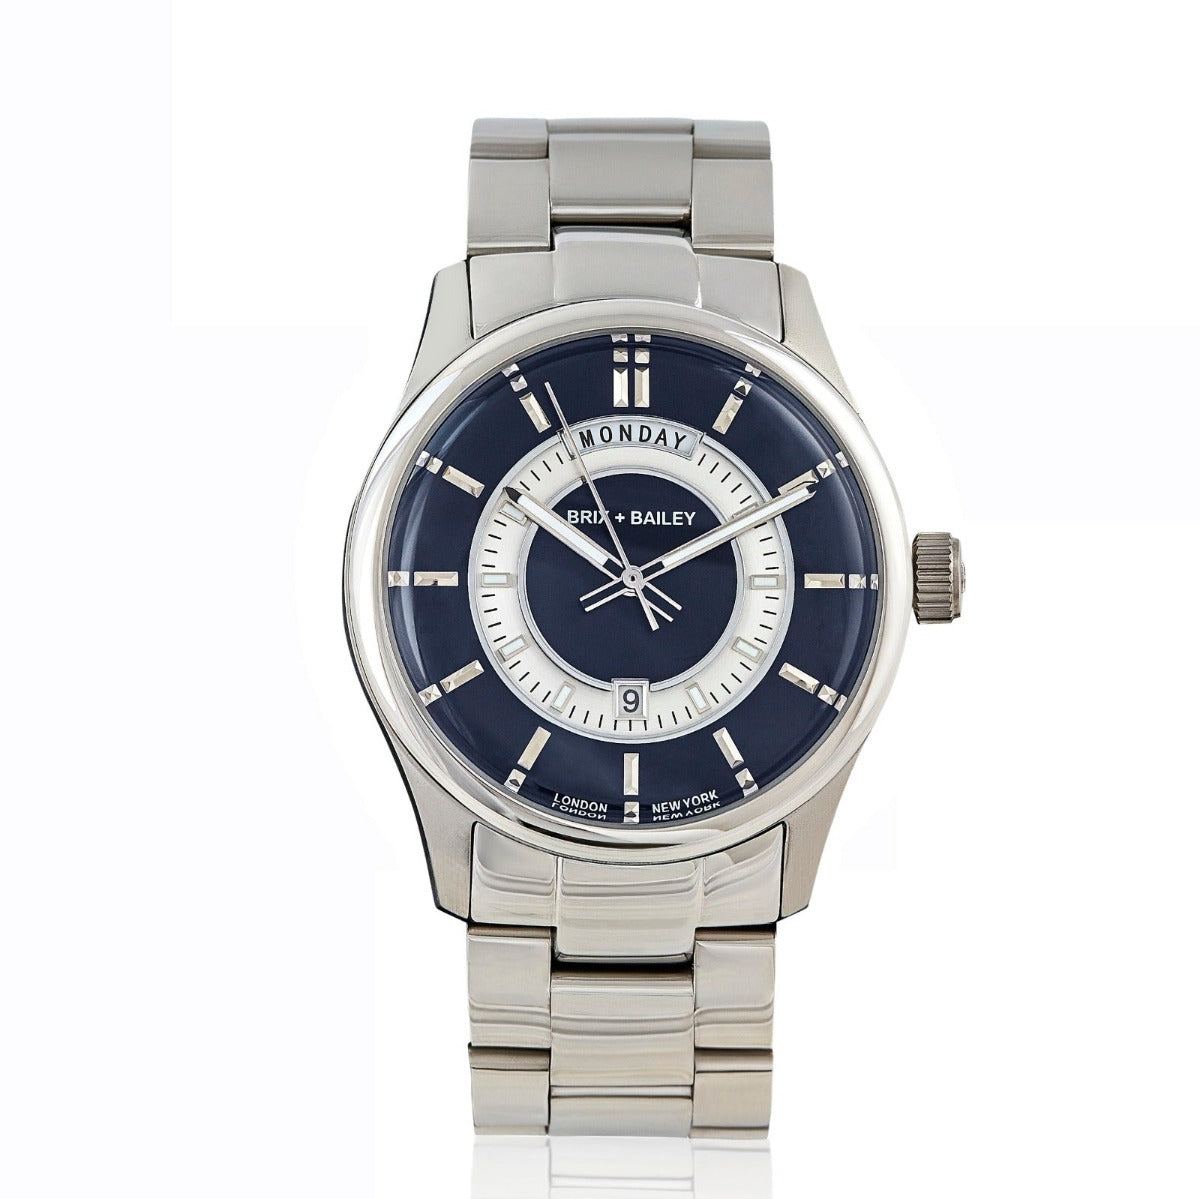 The Brix + Bailey Barker Watch Form 4